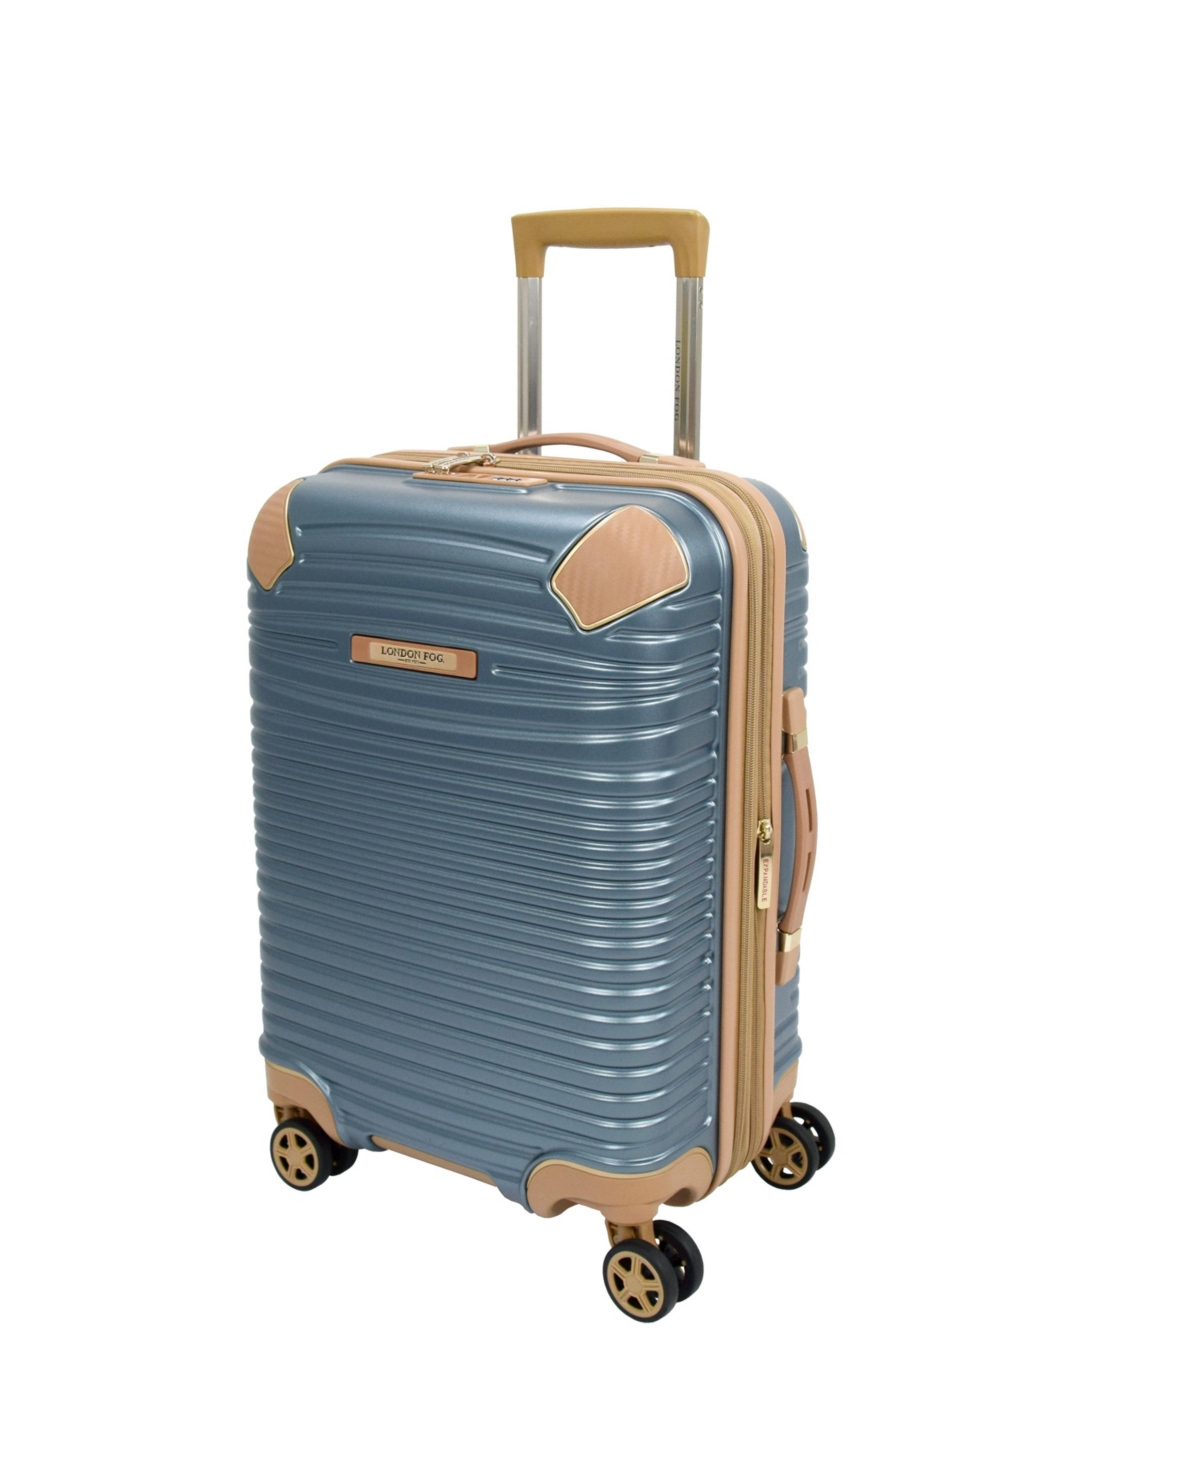 Closeout! London Fog Chelsea 20" Hardside Carry-On Spinner Suitcase - Champagne